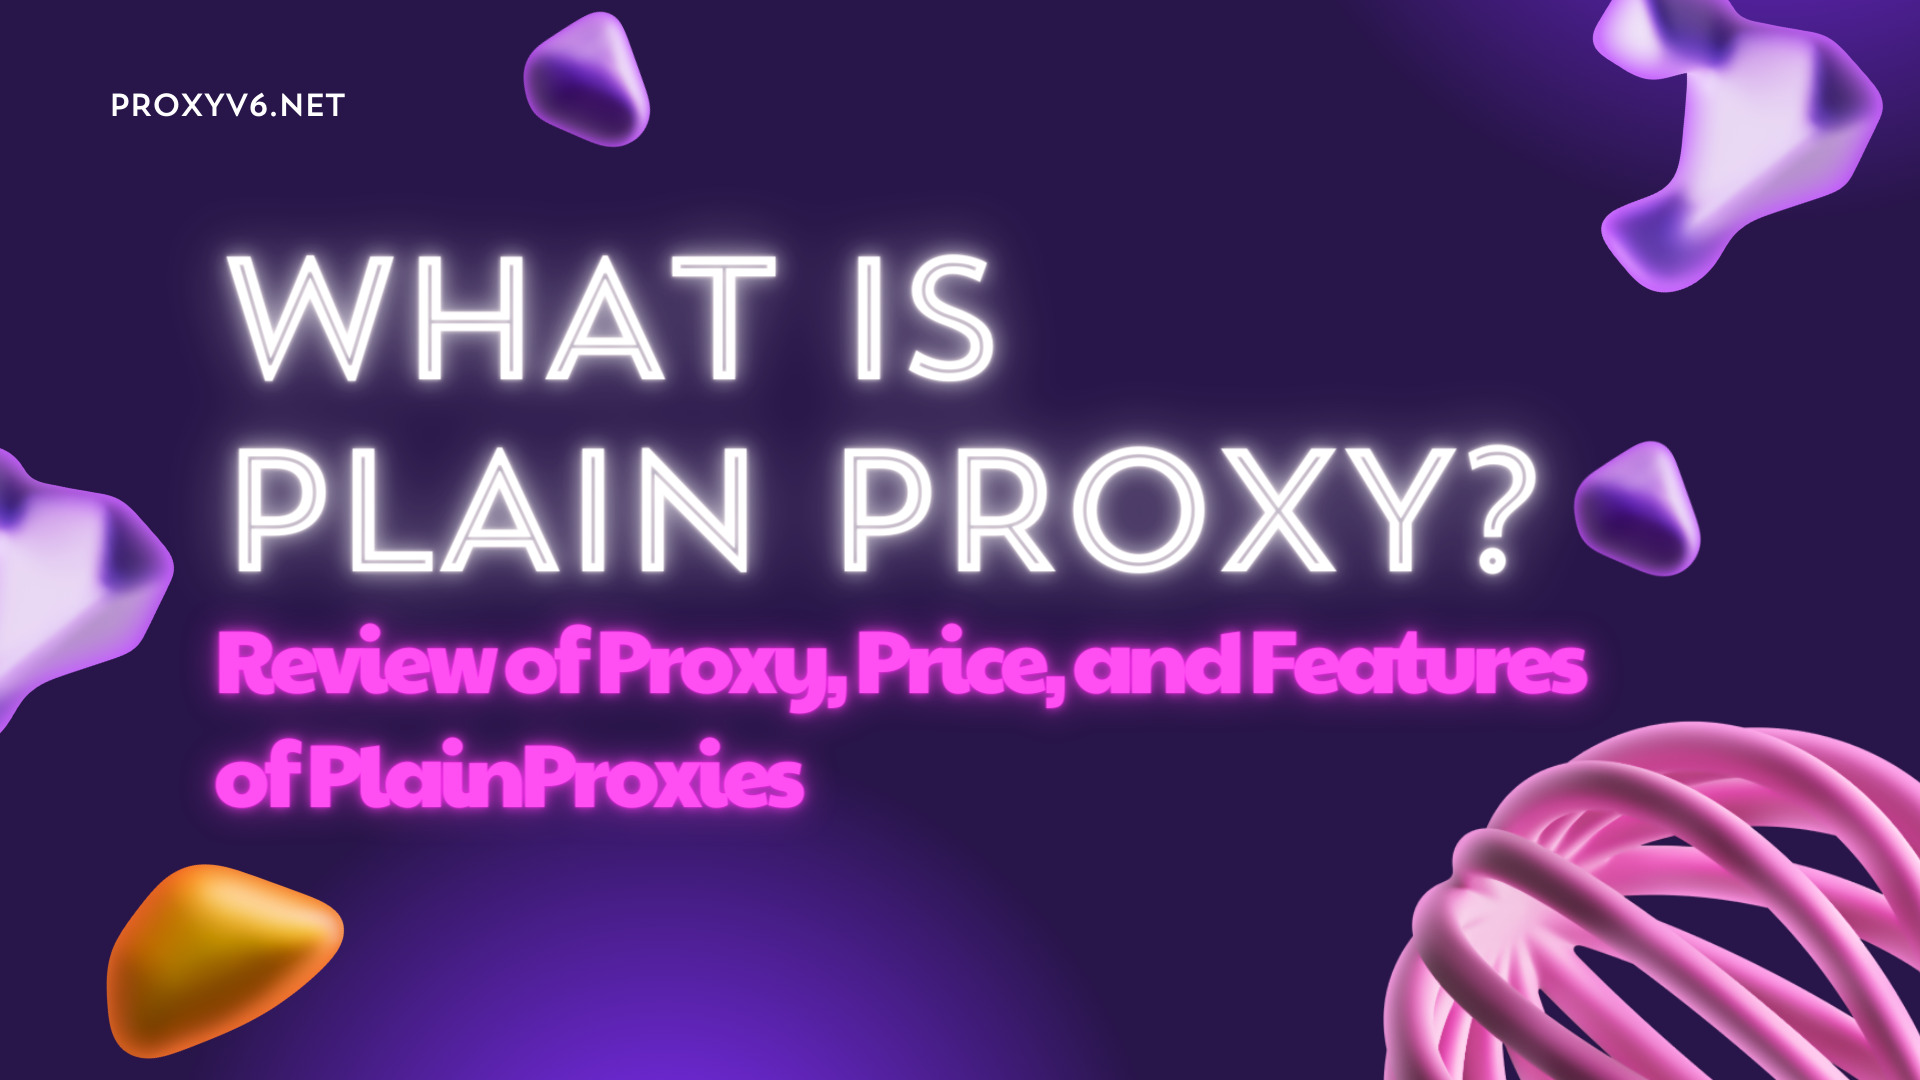 What is Plain Proxy? Review of Proxy, Price, and Features of PlainProxies